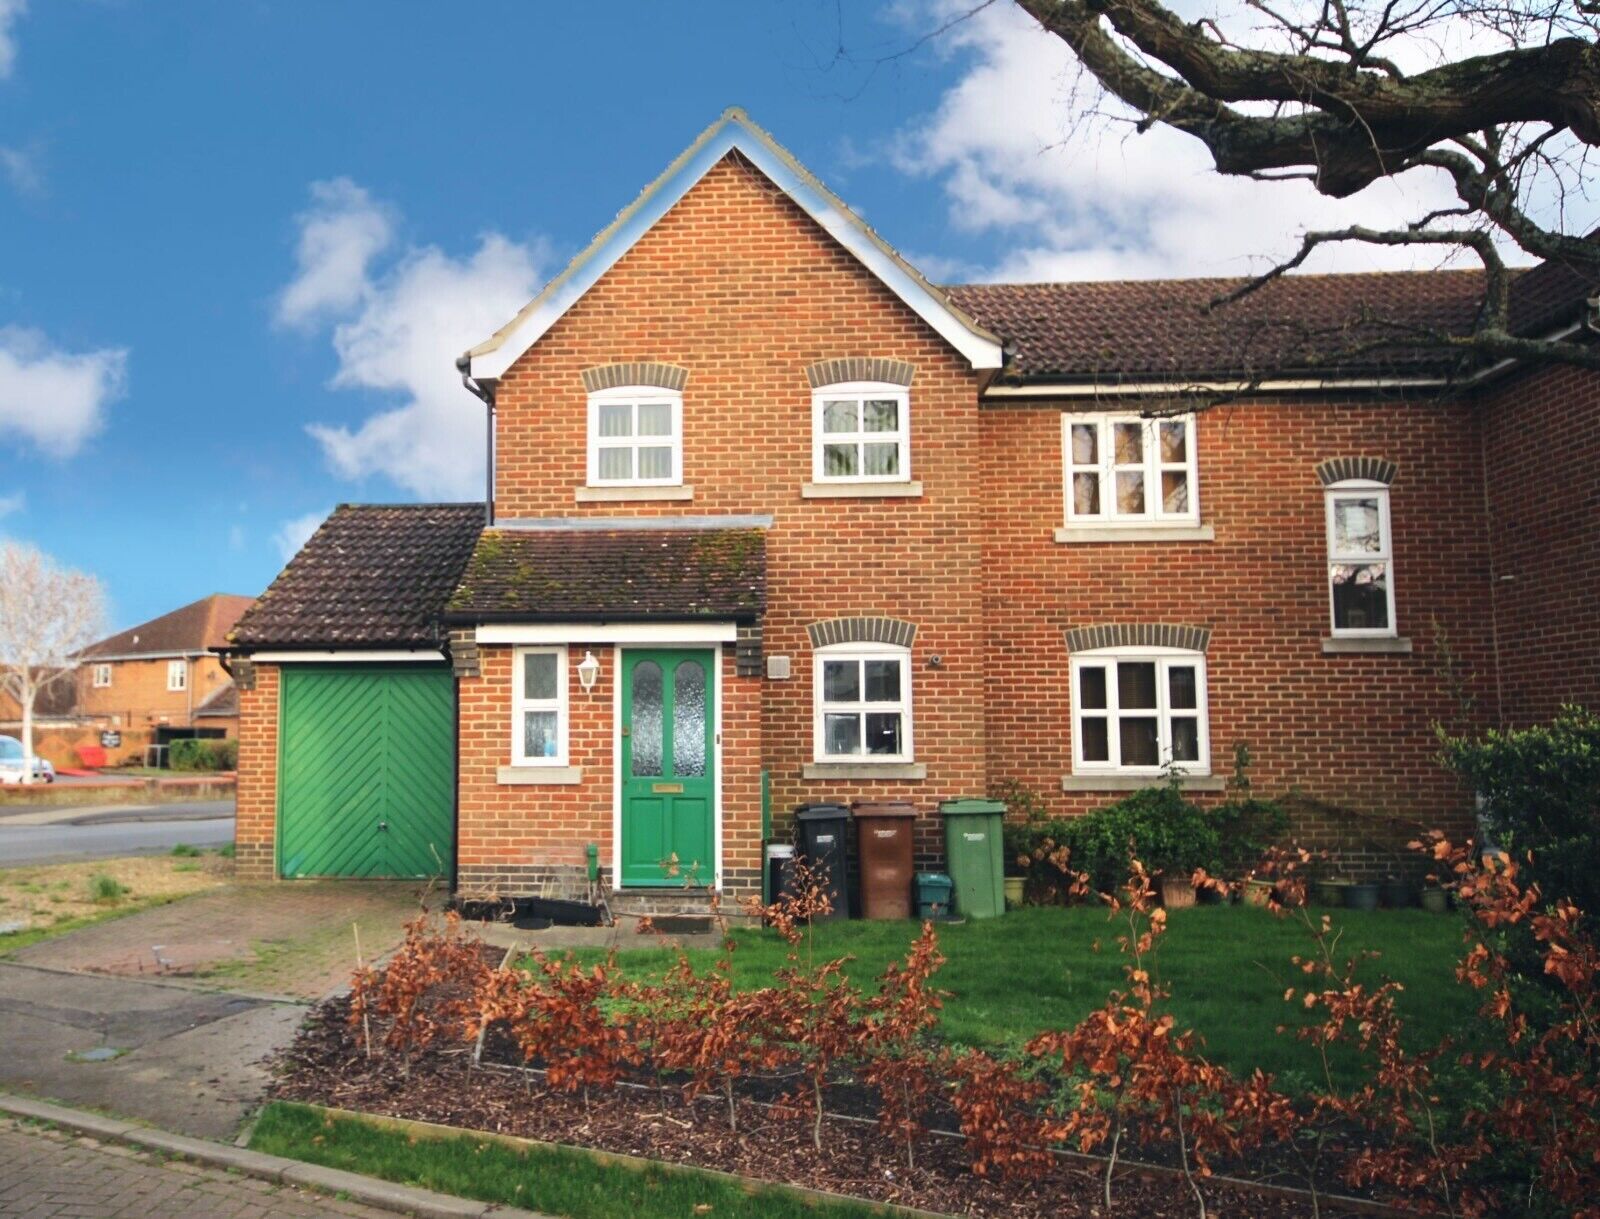 2 bedroom semi detached house for sale Swarbourne Close, Didcot, OX11, main image